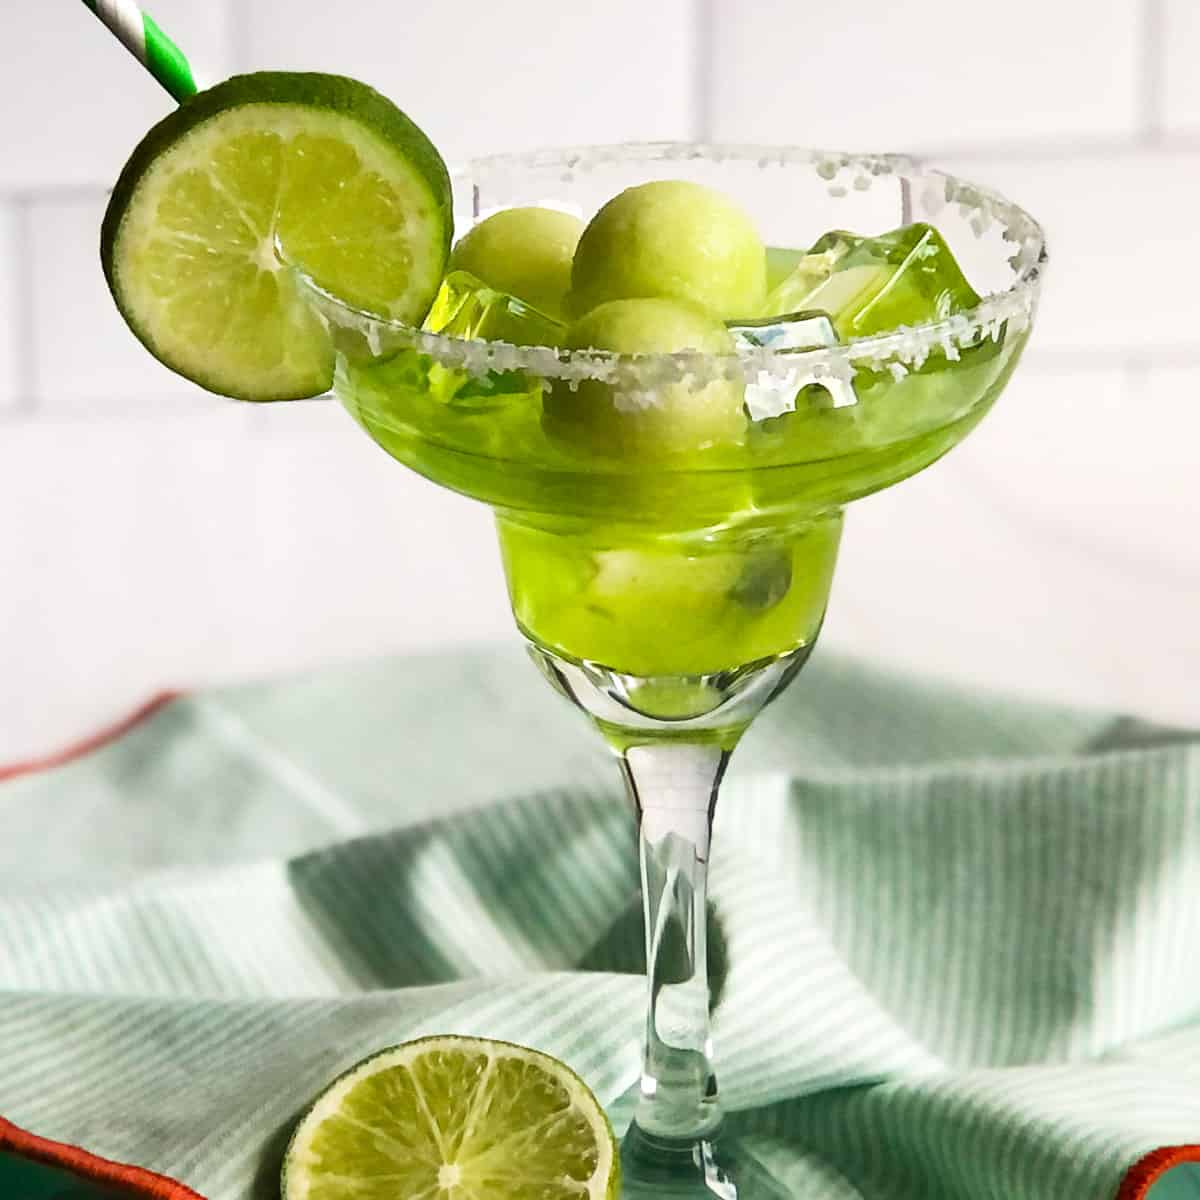 Melon Daiquiri garnished with melon balls and a lime wheel.